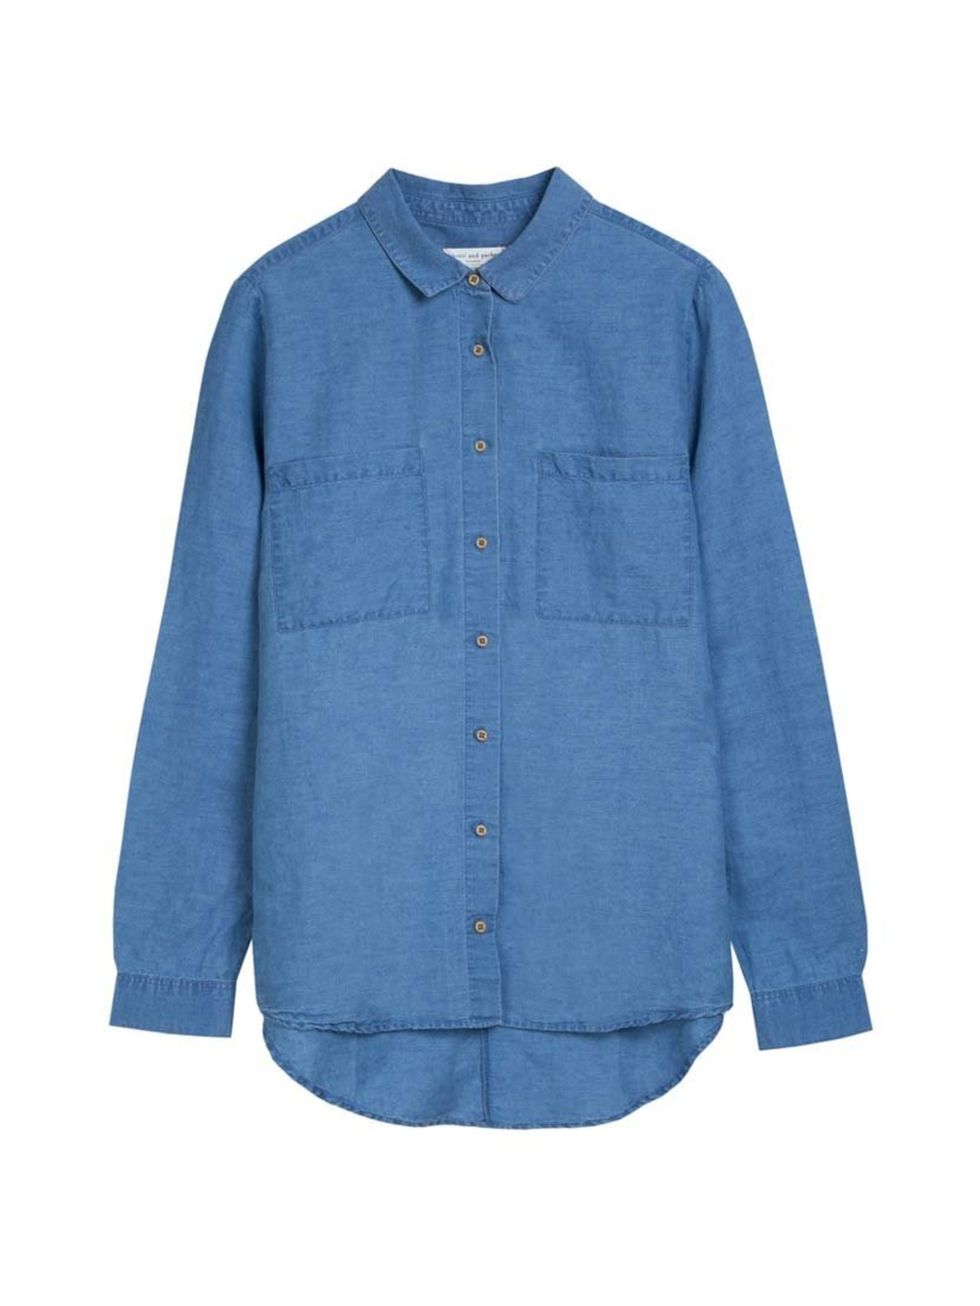 <p>Wear with navy trousers now, and printed shorts for summer.</p><p><a href="http://www.chintiandparker.com/uk/new-oversized-chambray-shirt-cp677b">Chinti and Parker</a> shirt, £145</p>